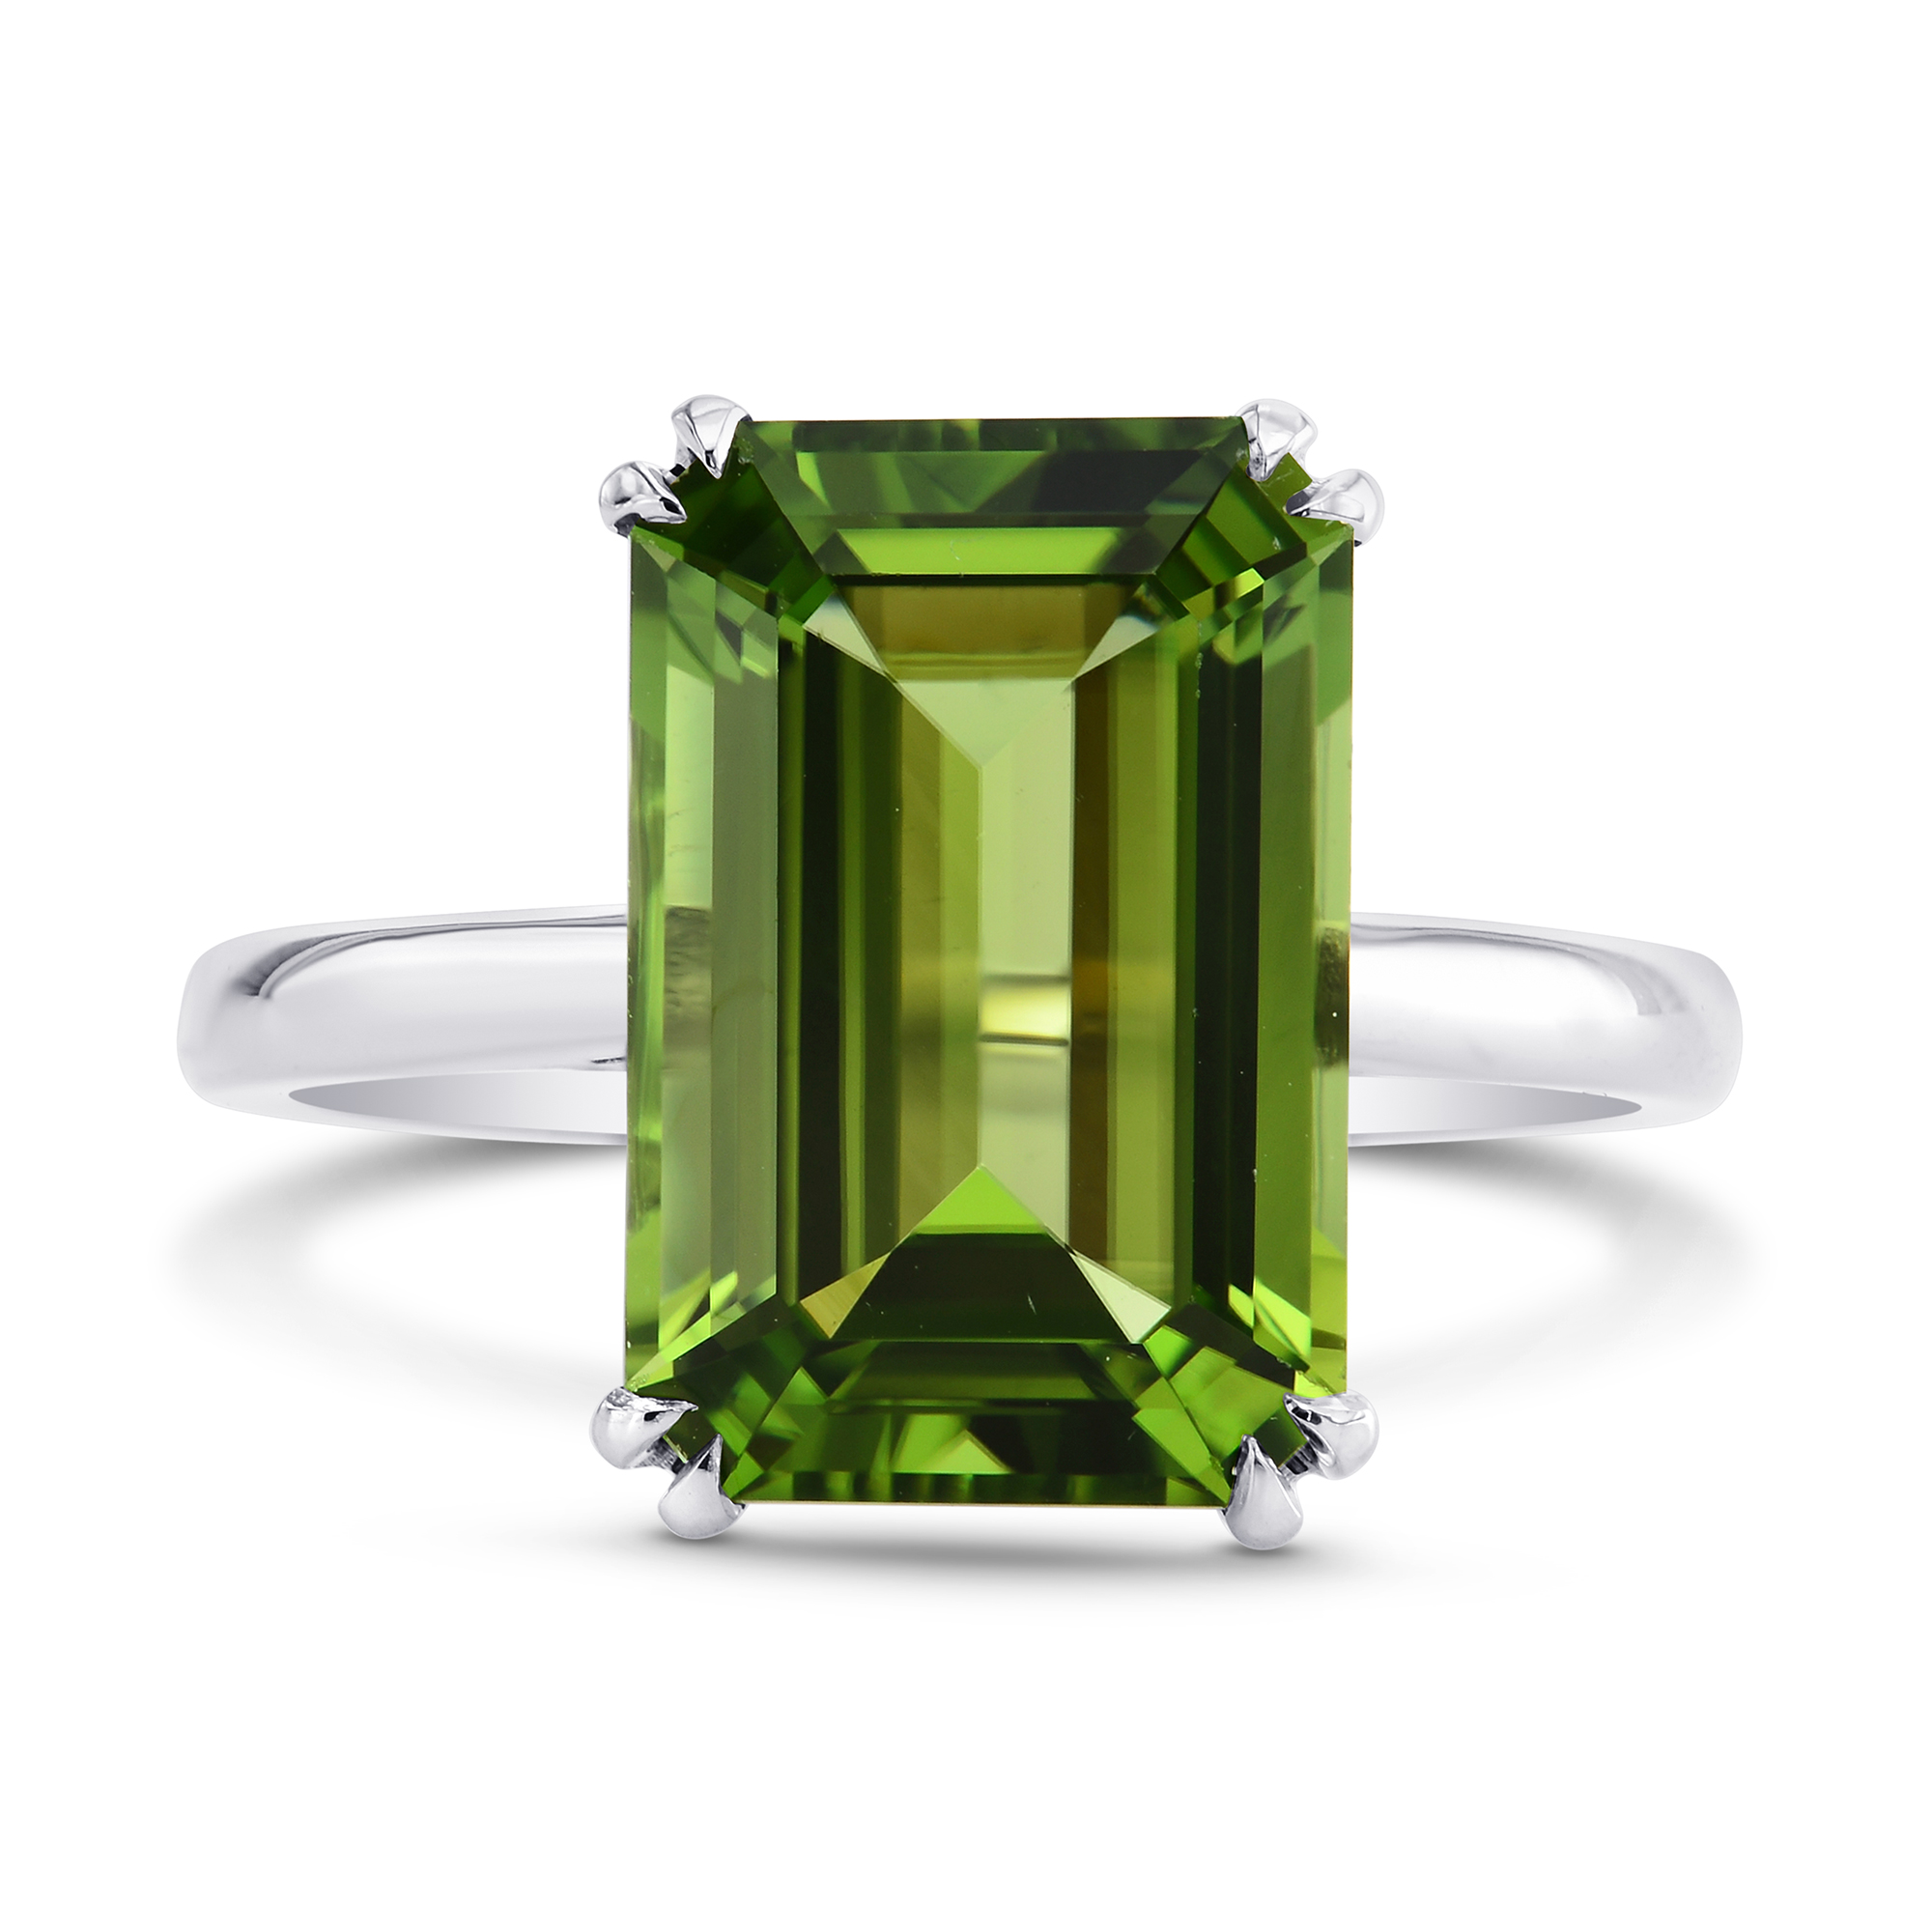 5.67cts Green Tourmaline Emerald shape Solitaire Ring, SKU 196641 (5.67Ct TW)